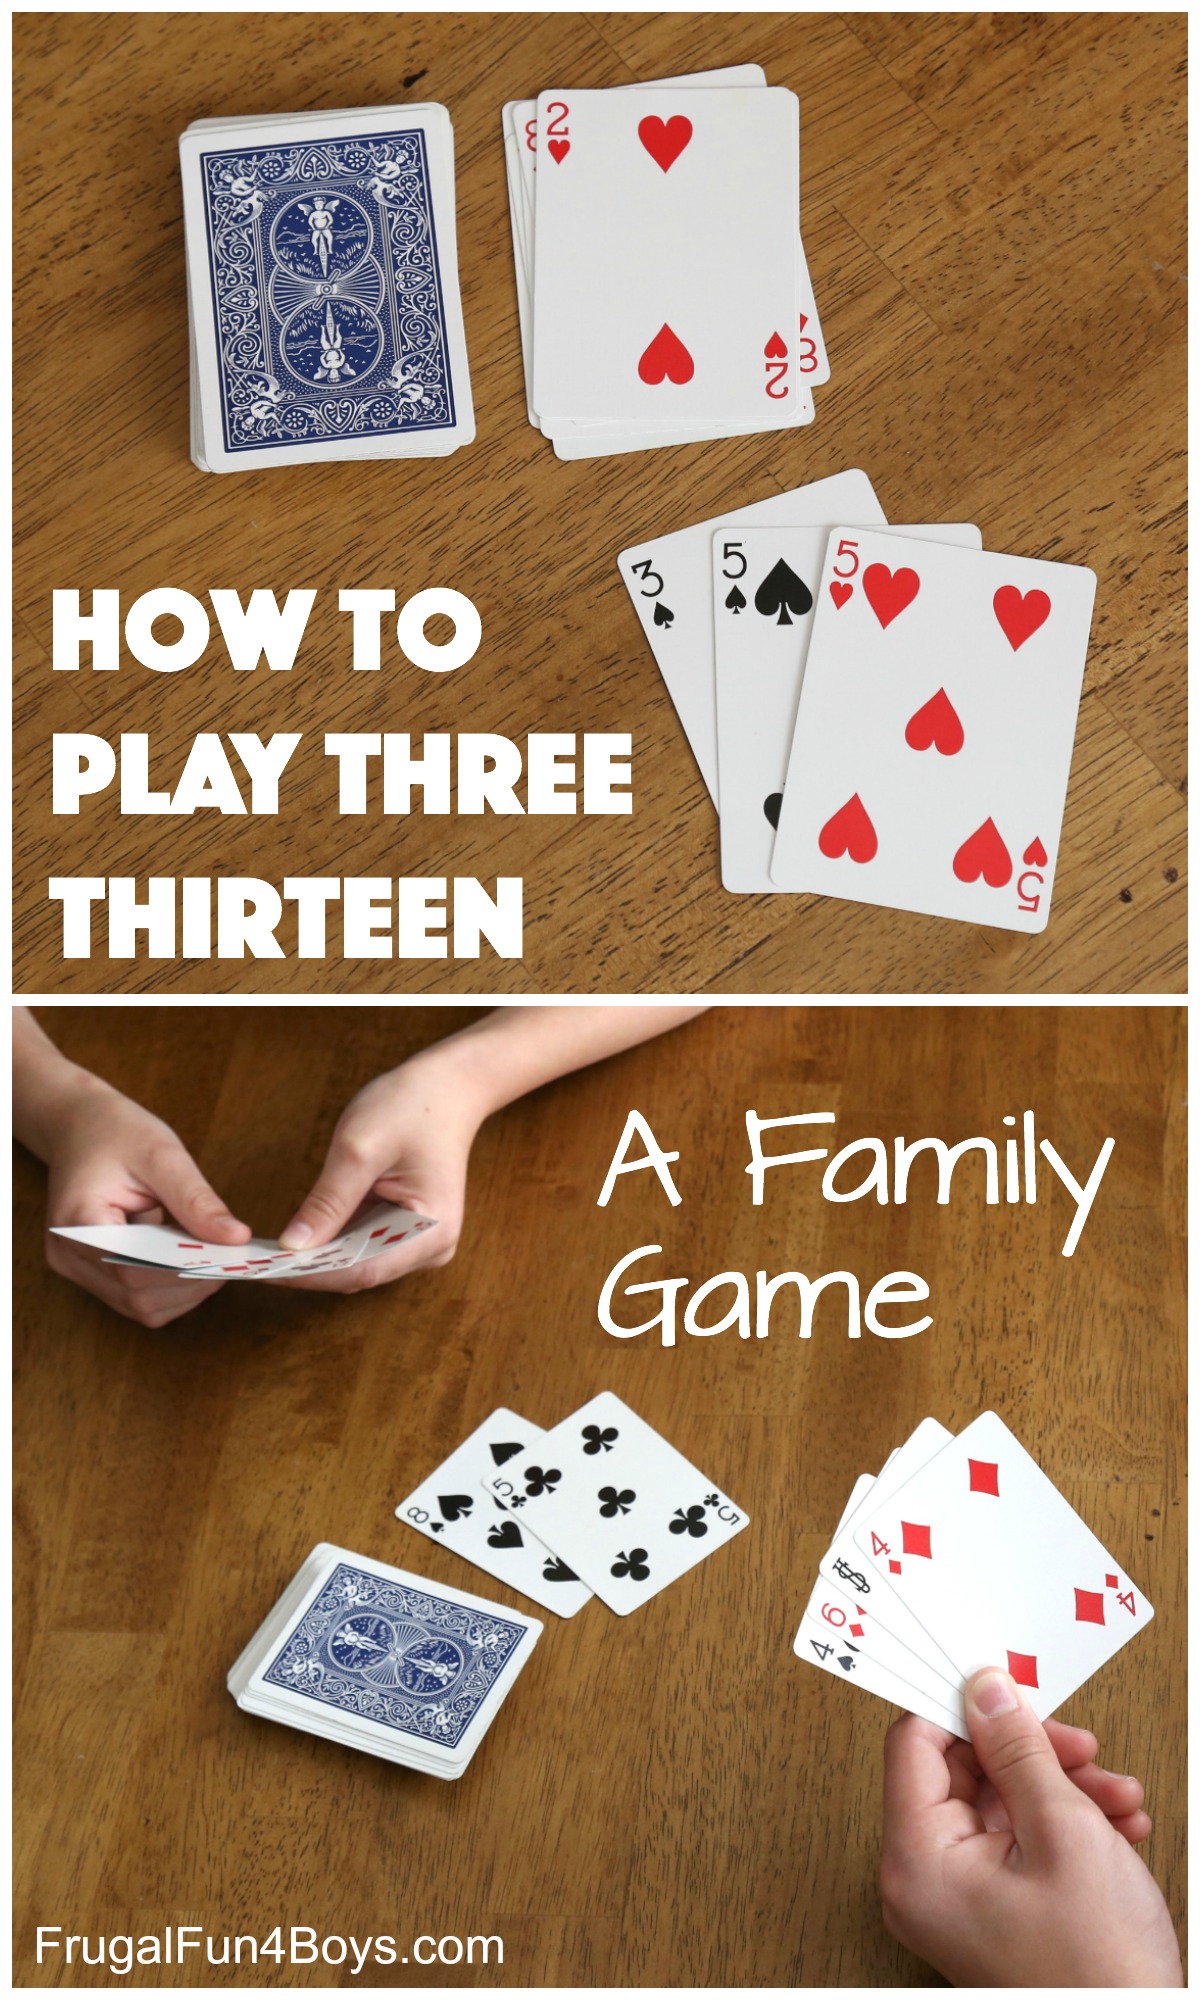 Card Games For 3 People